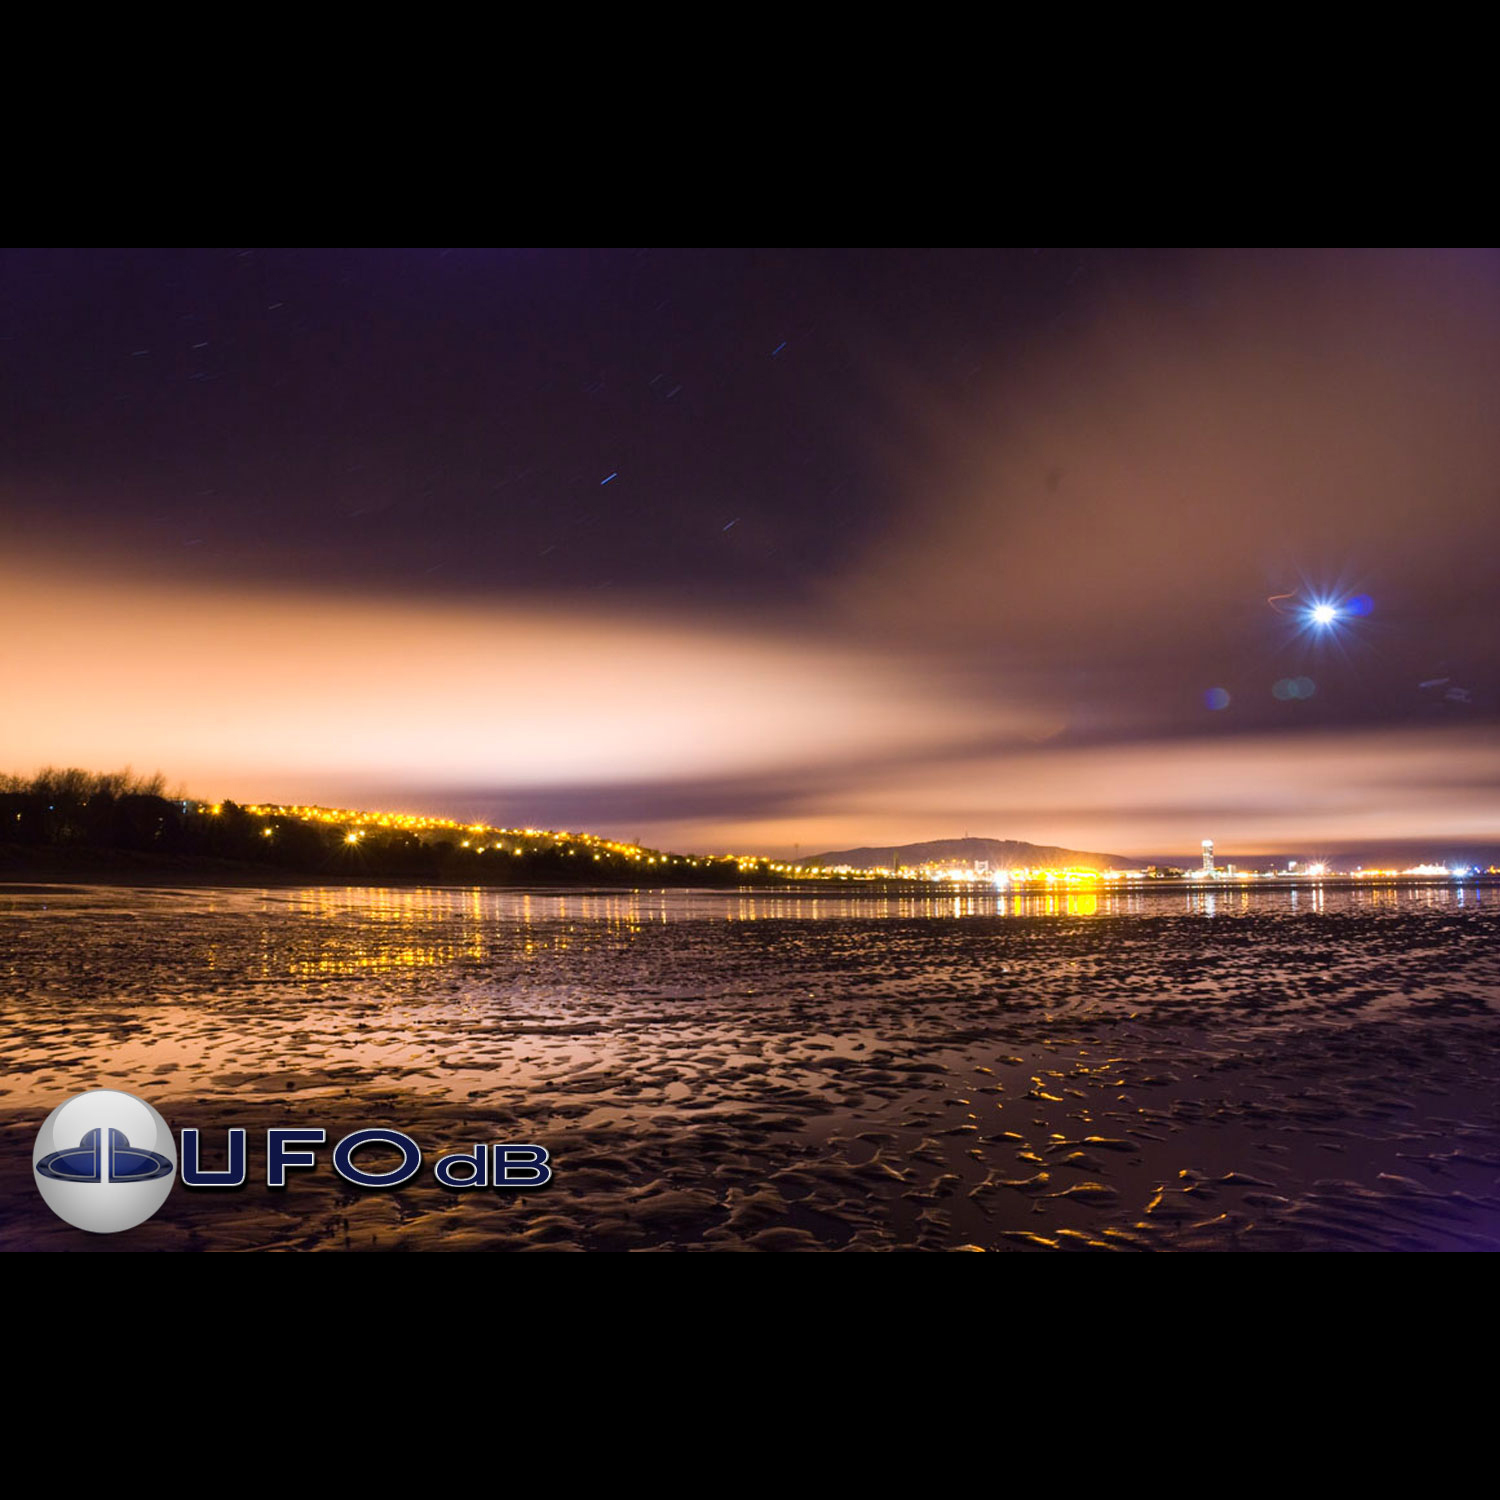 Bright glowing UFO caught on picture during long exposure | England UFO Picture #218-1